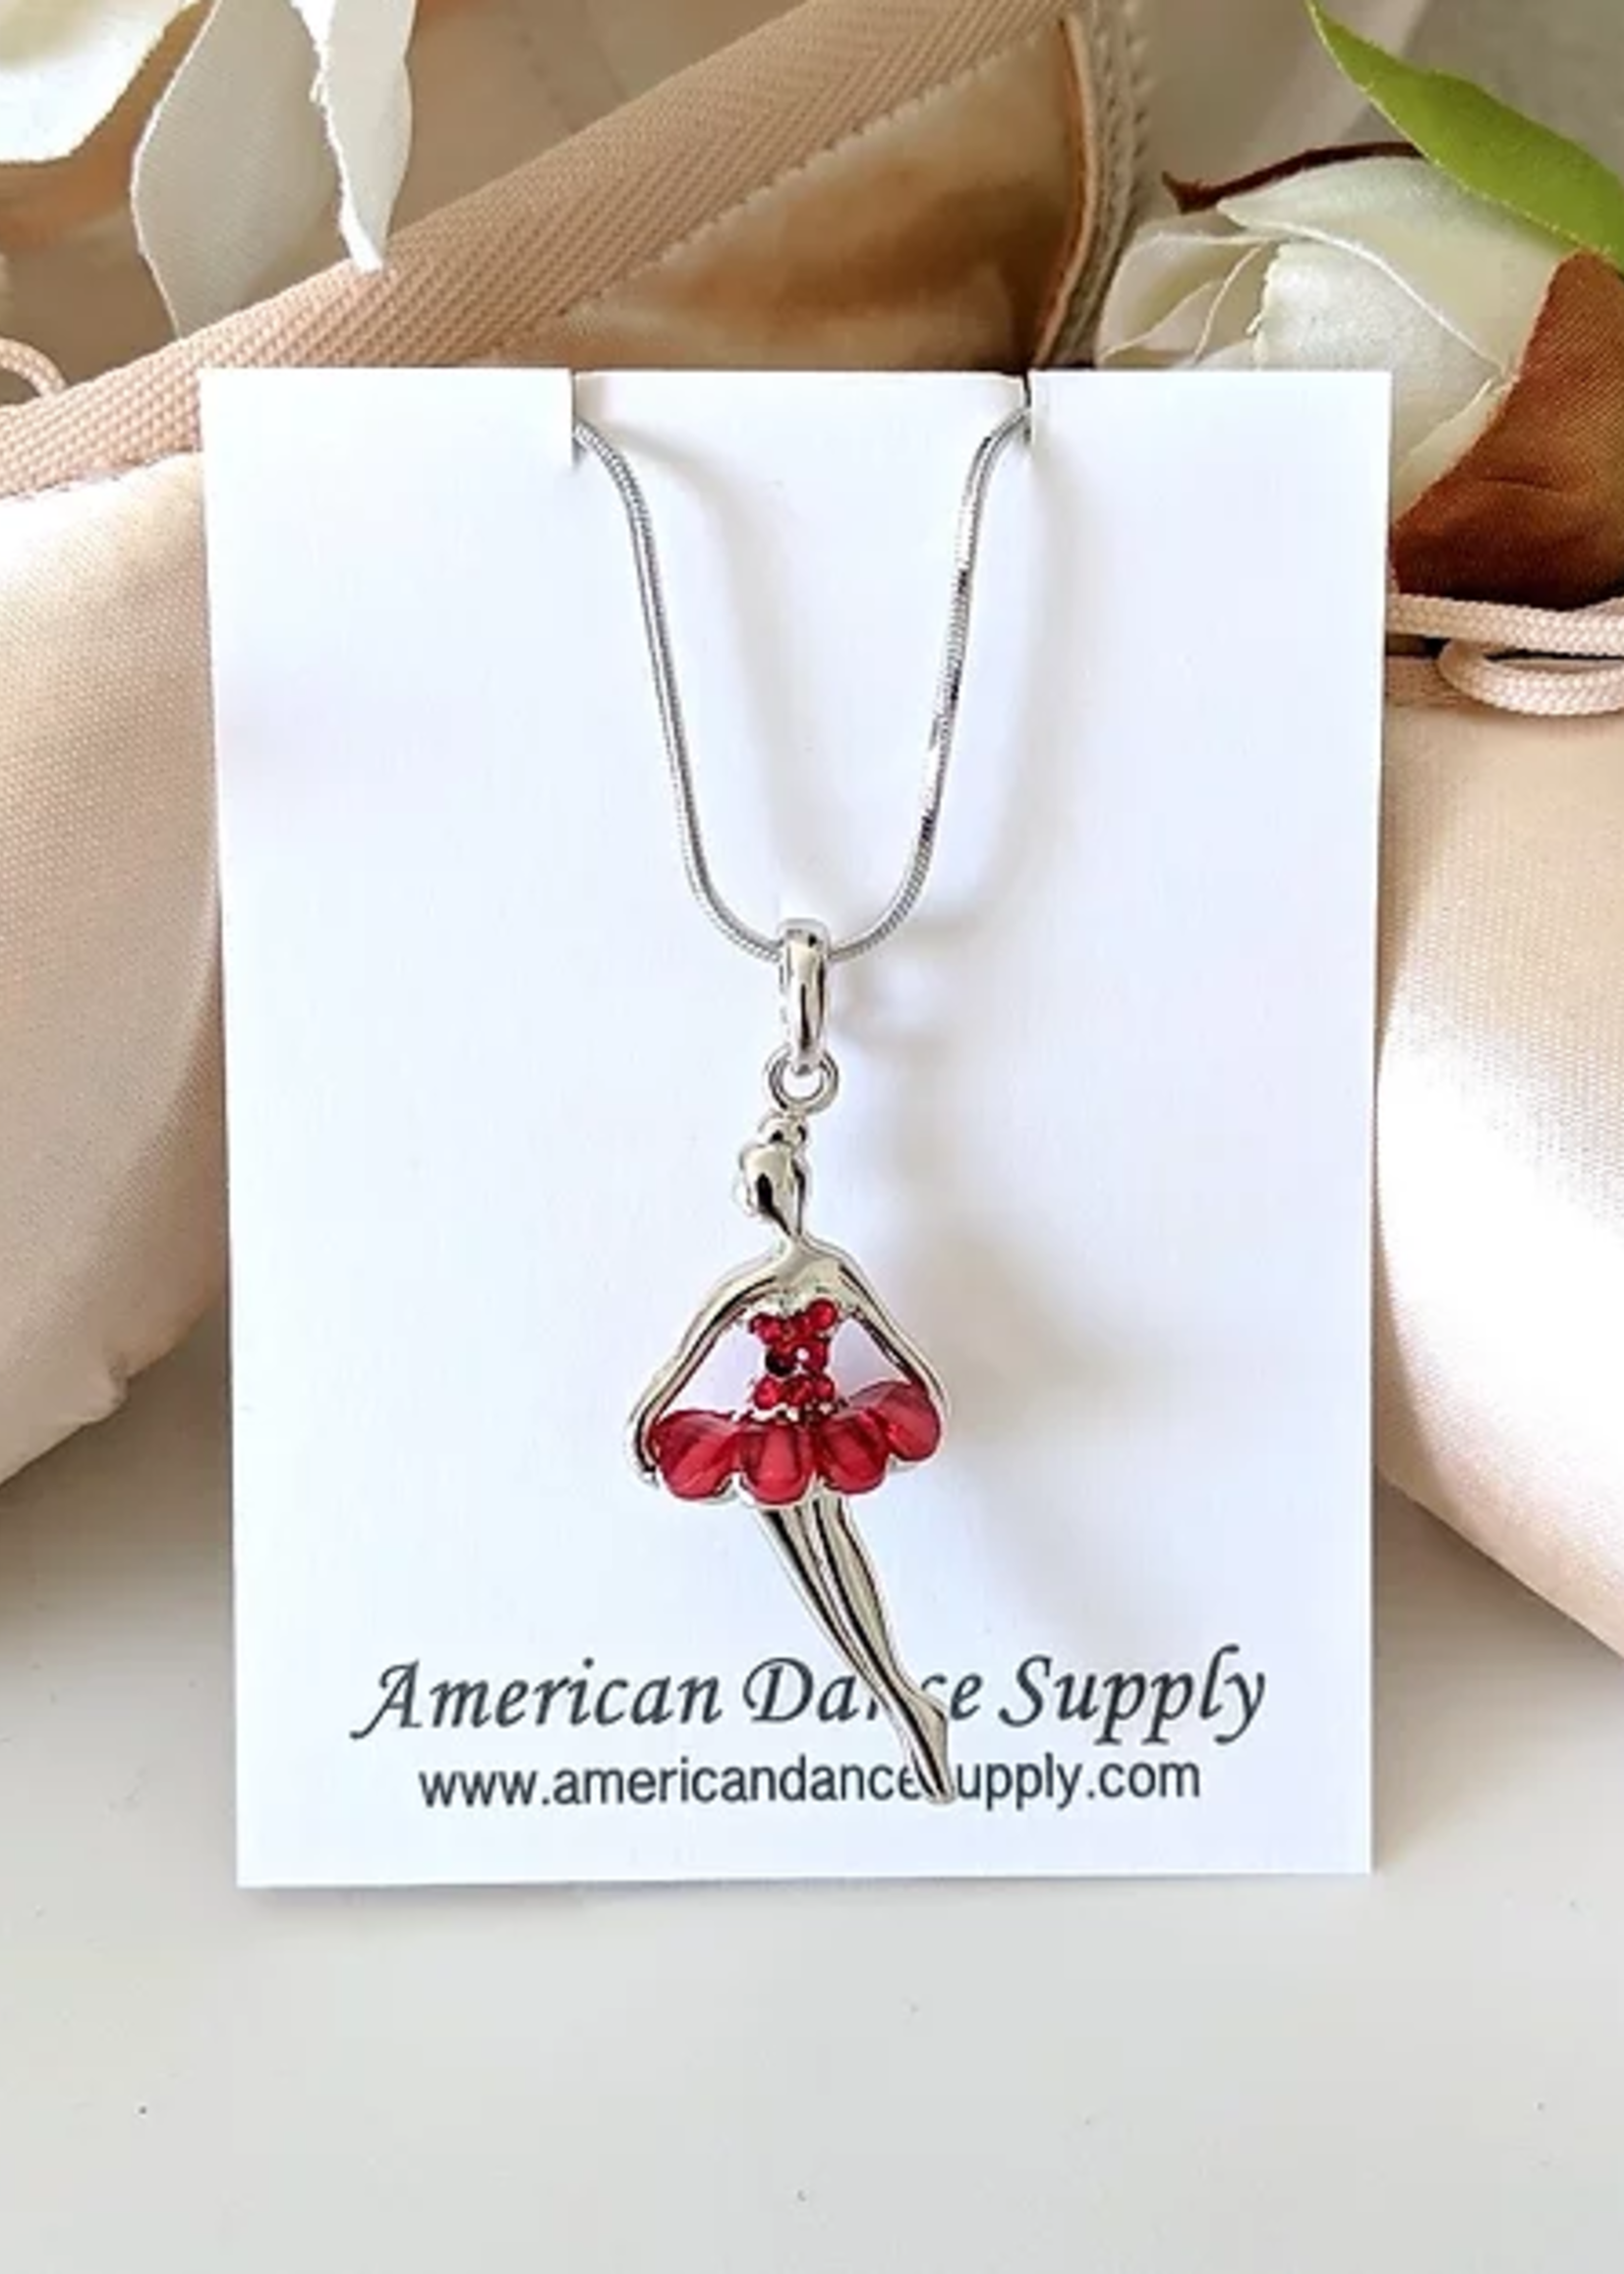 American Dance Supply ADS Ballerina Necklace Red